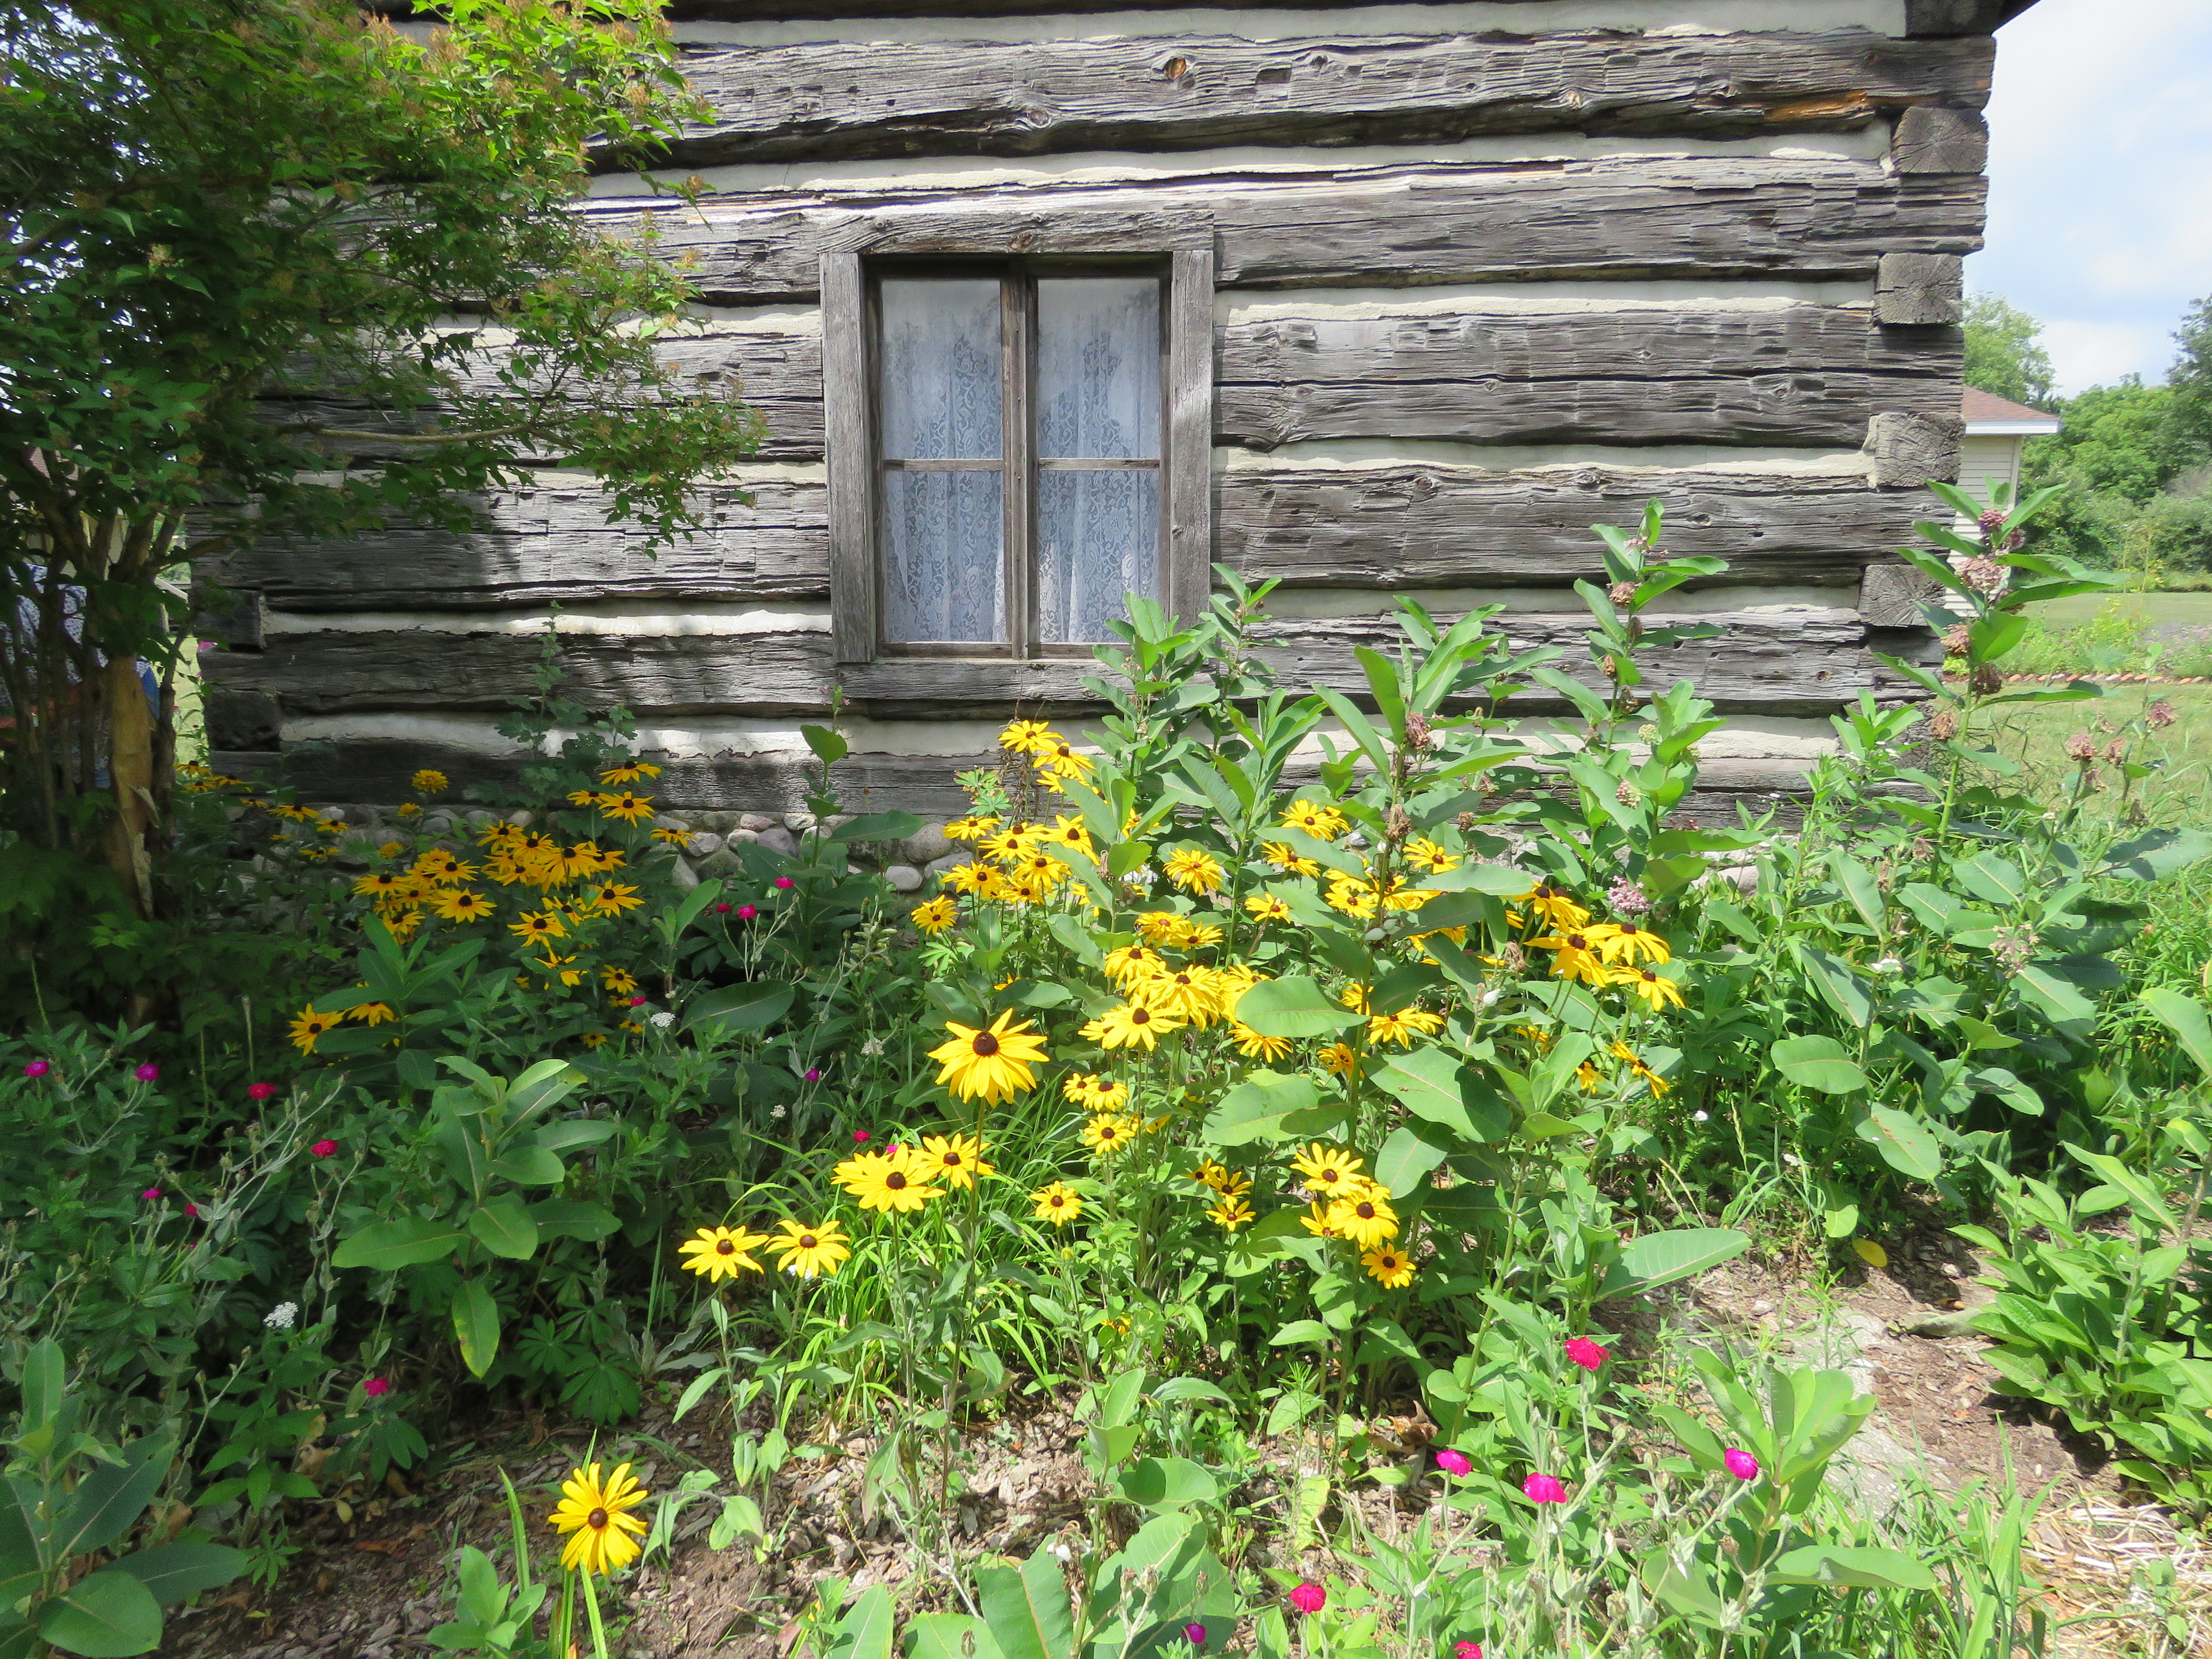 Flowers in front of a log cabin.